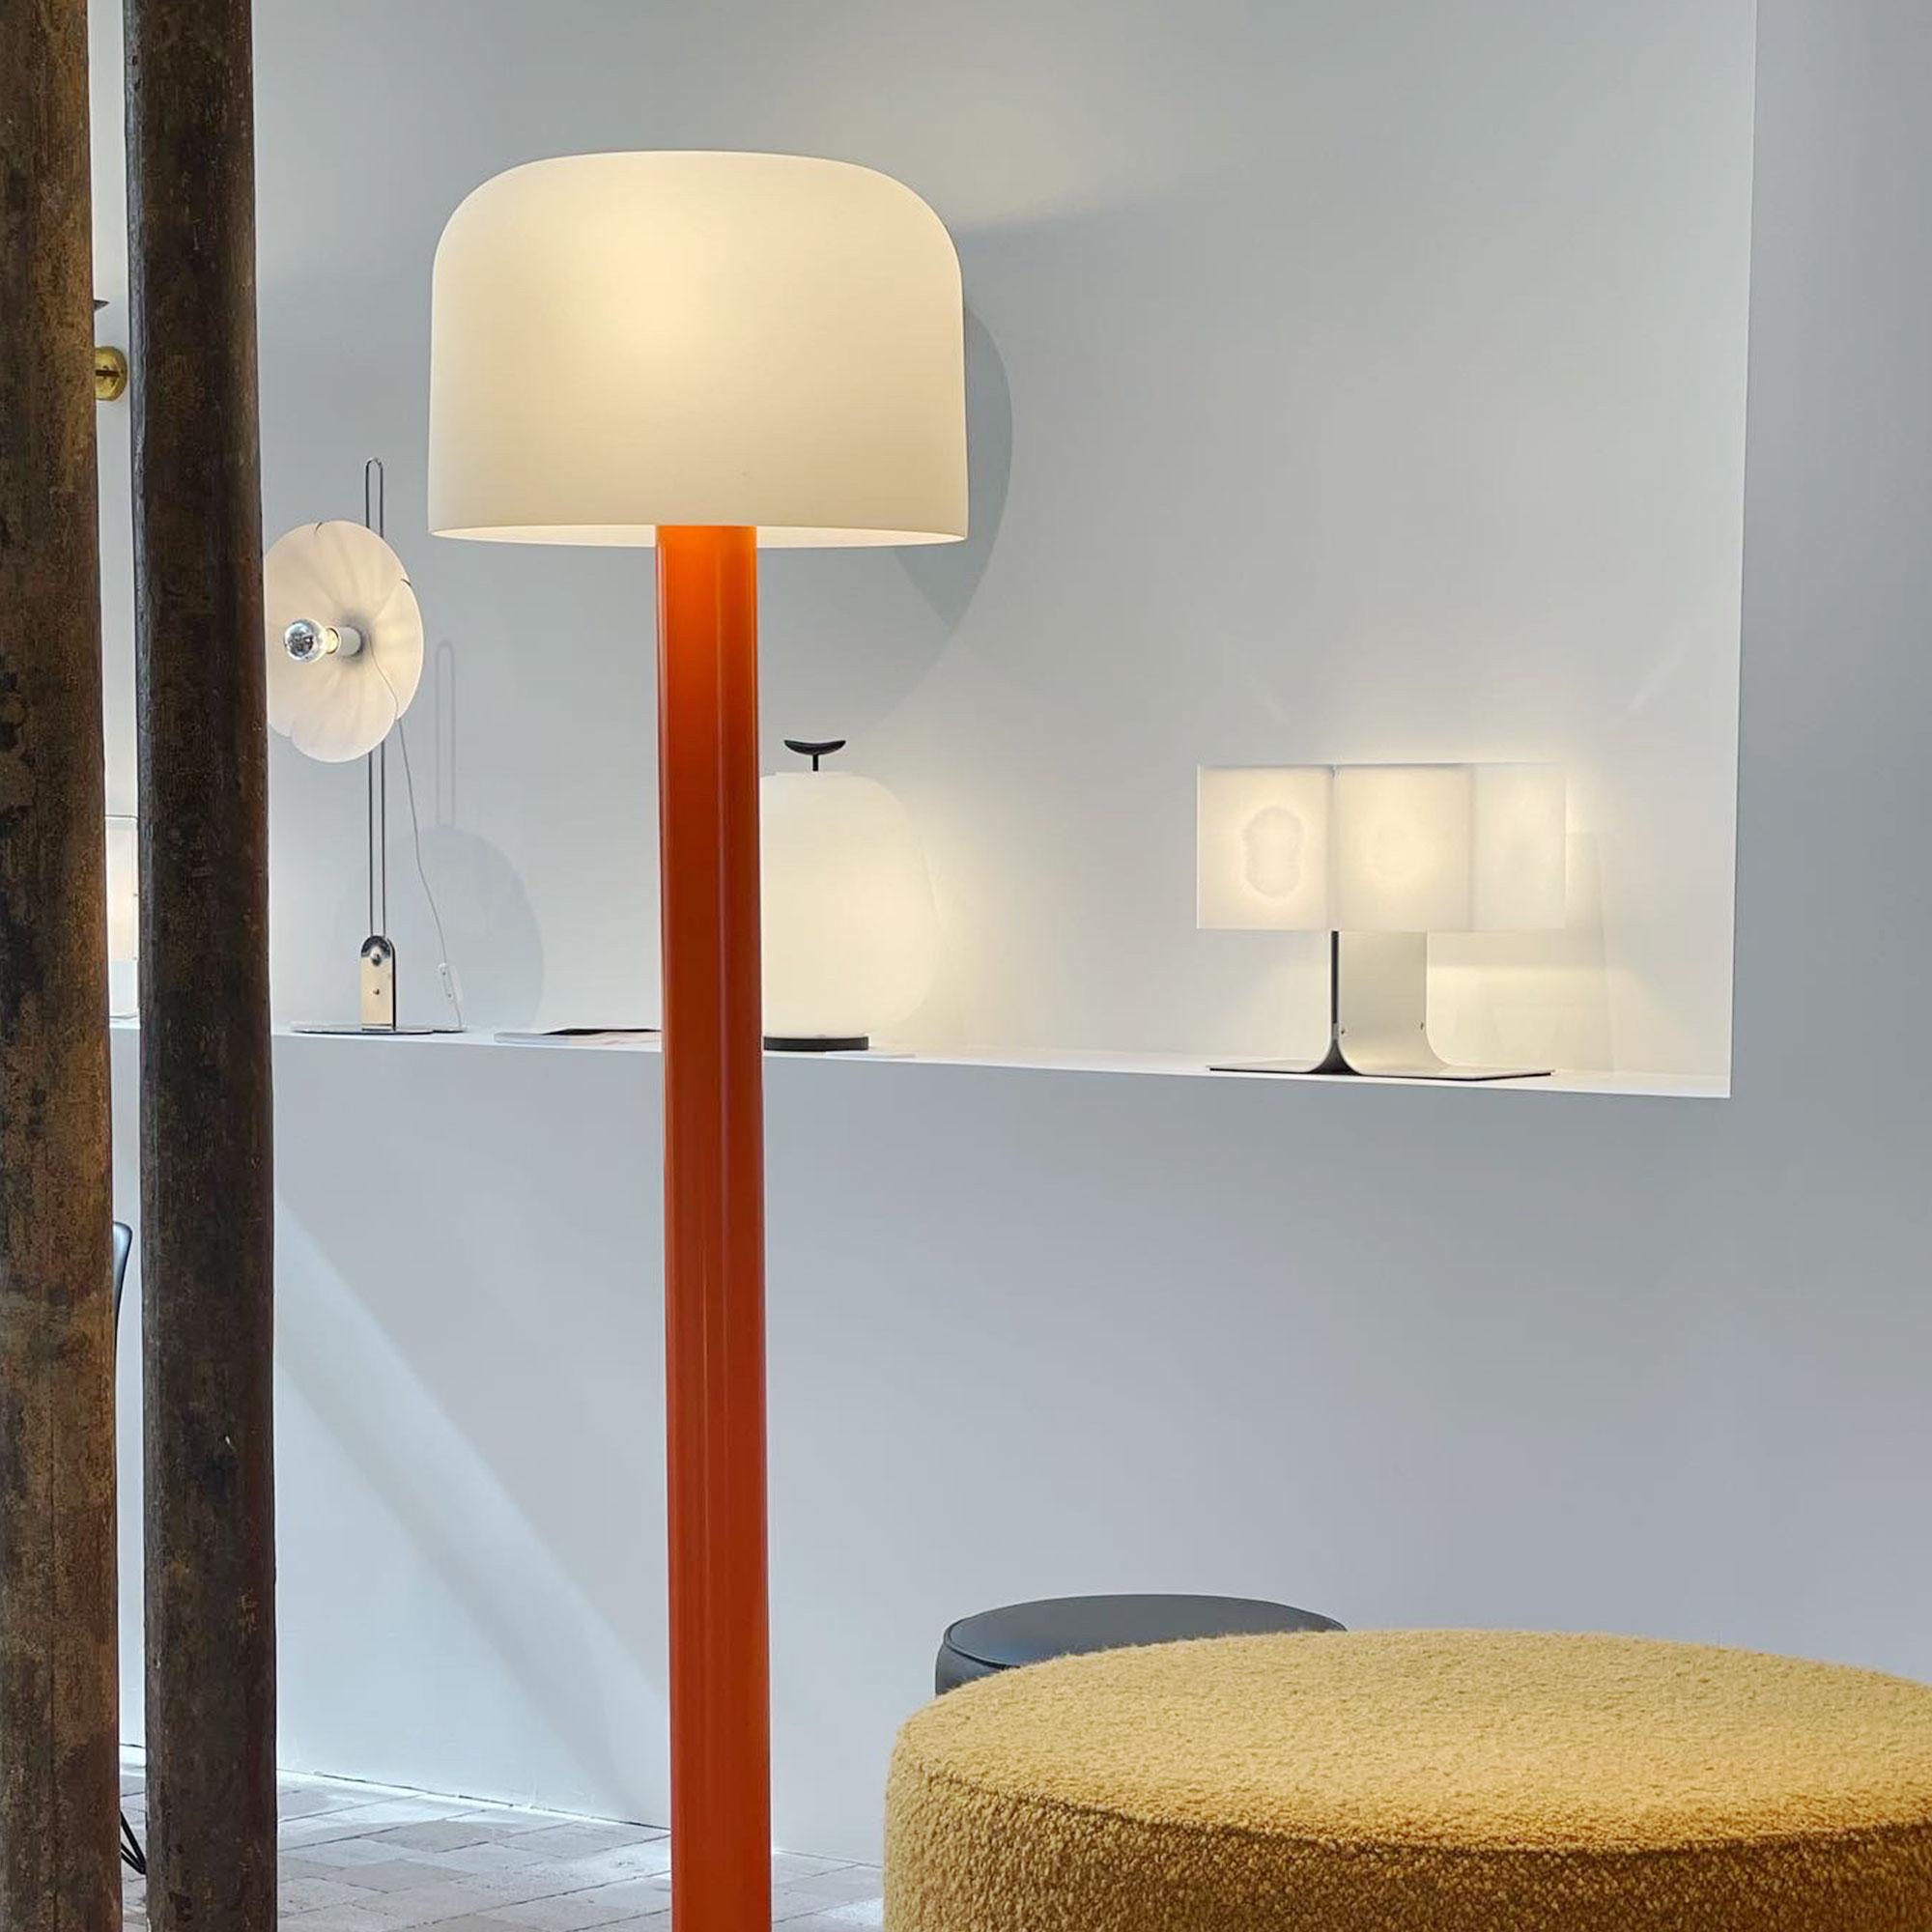 Michel Mortier 10527 metal and glass floor lamp for Disderot in orange.

Originally designed in 1972, this sculptural floor lamp is a newly produced numbered edition with an authentication certificate. Made in France by Disderot with many of the